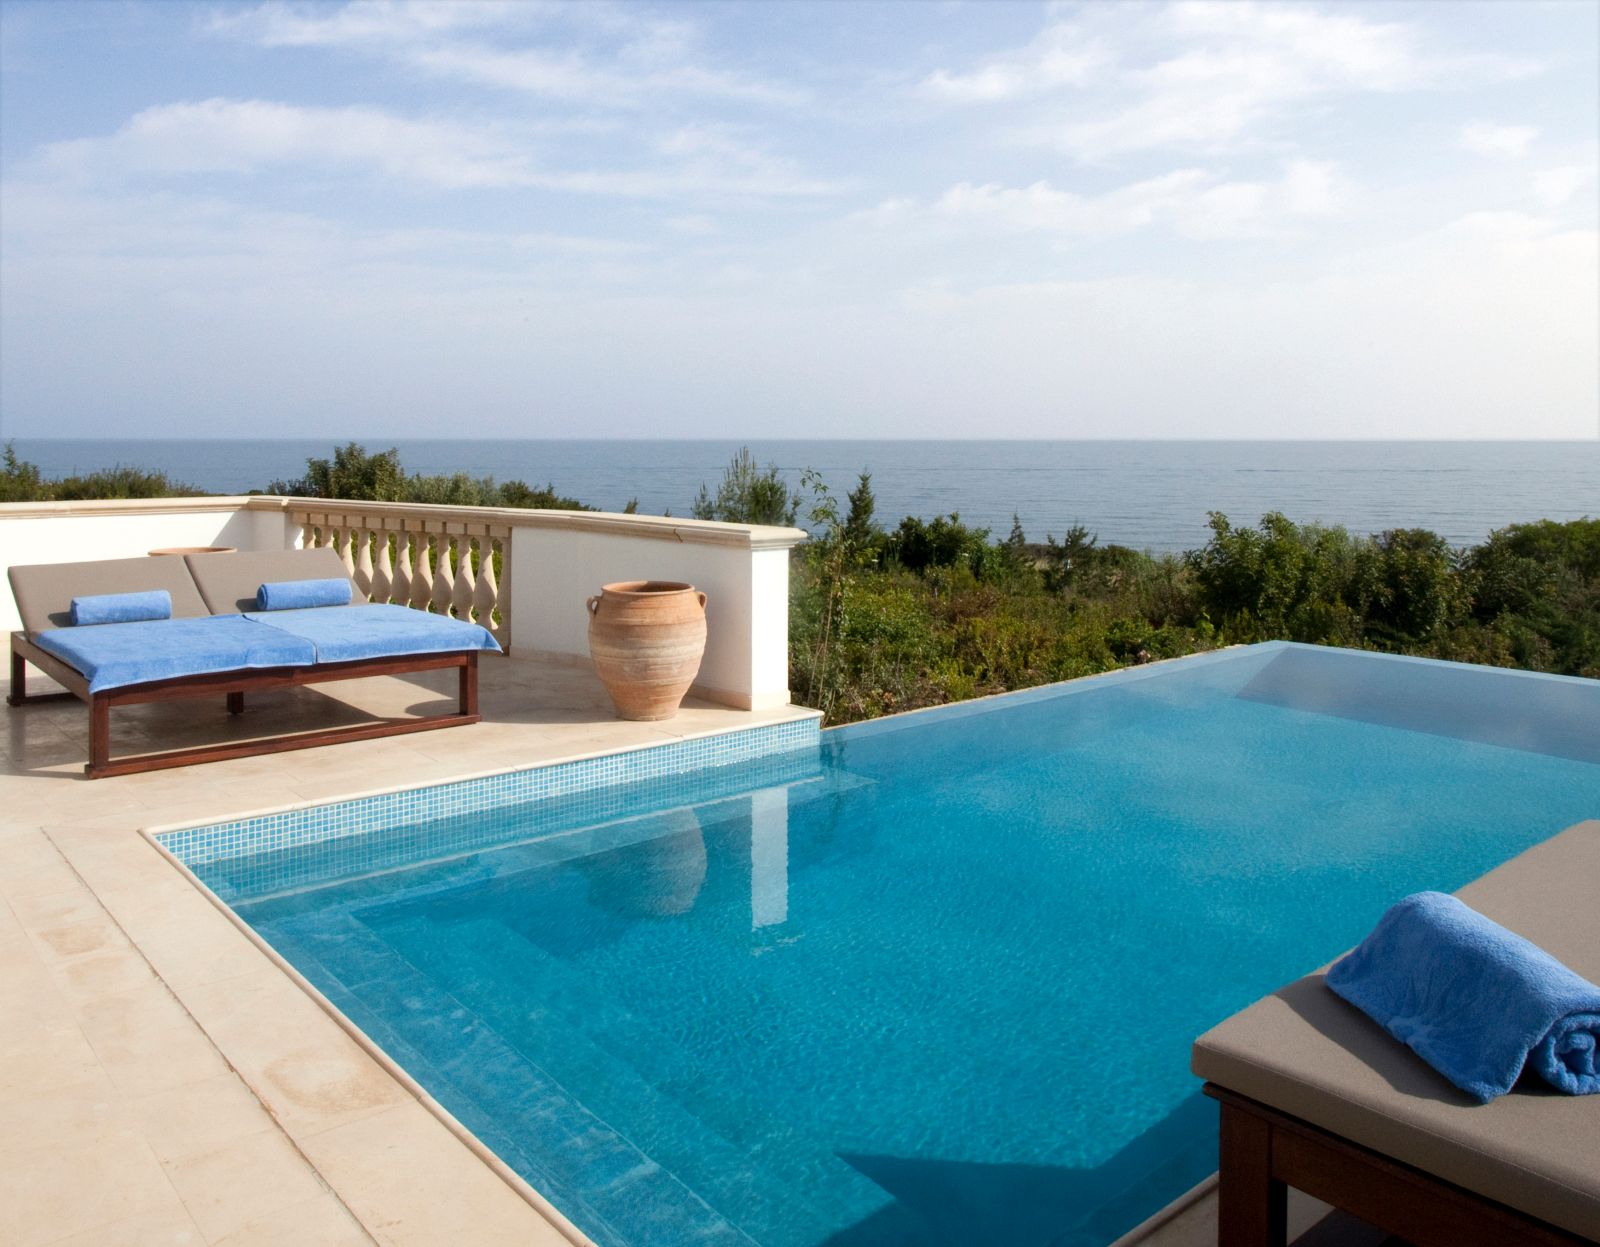 Private plunge pool of a suite at the Anassa resort in Cyprus